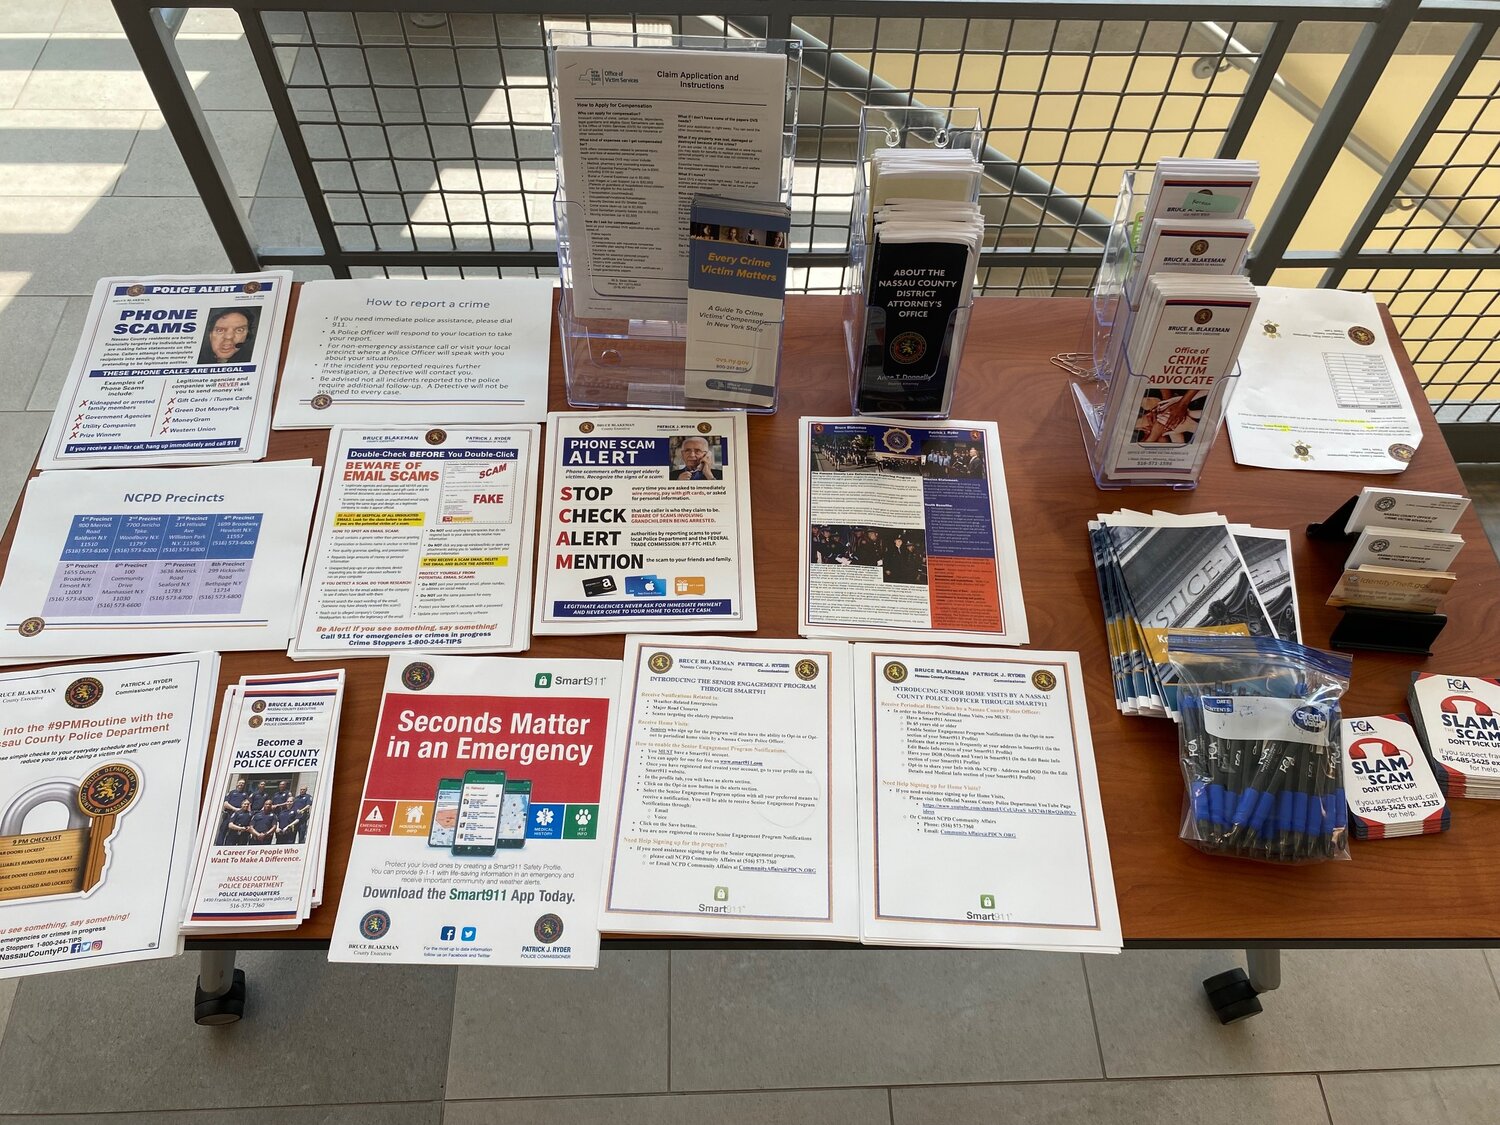 The Nassau County Police Department’s Community Affairs staff advised East Meadow seniors on the best ways to report scams and fraudulent activity as well as measures to keep themselves safe.